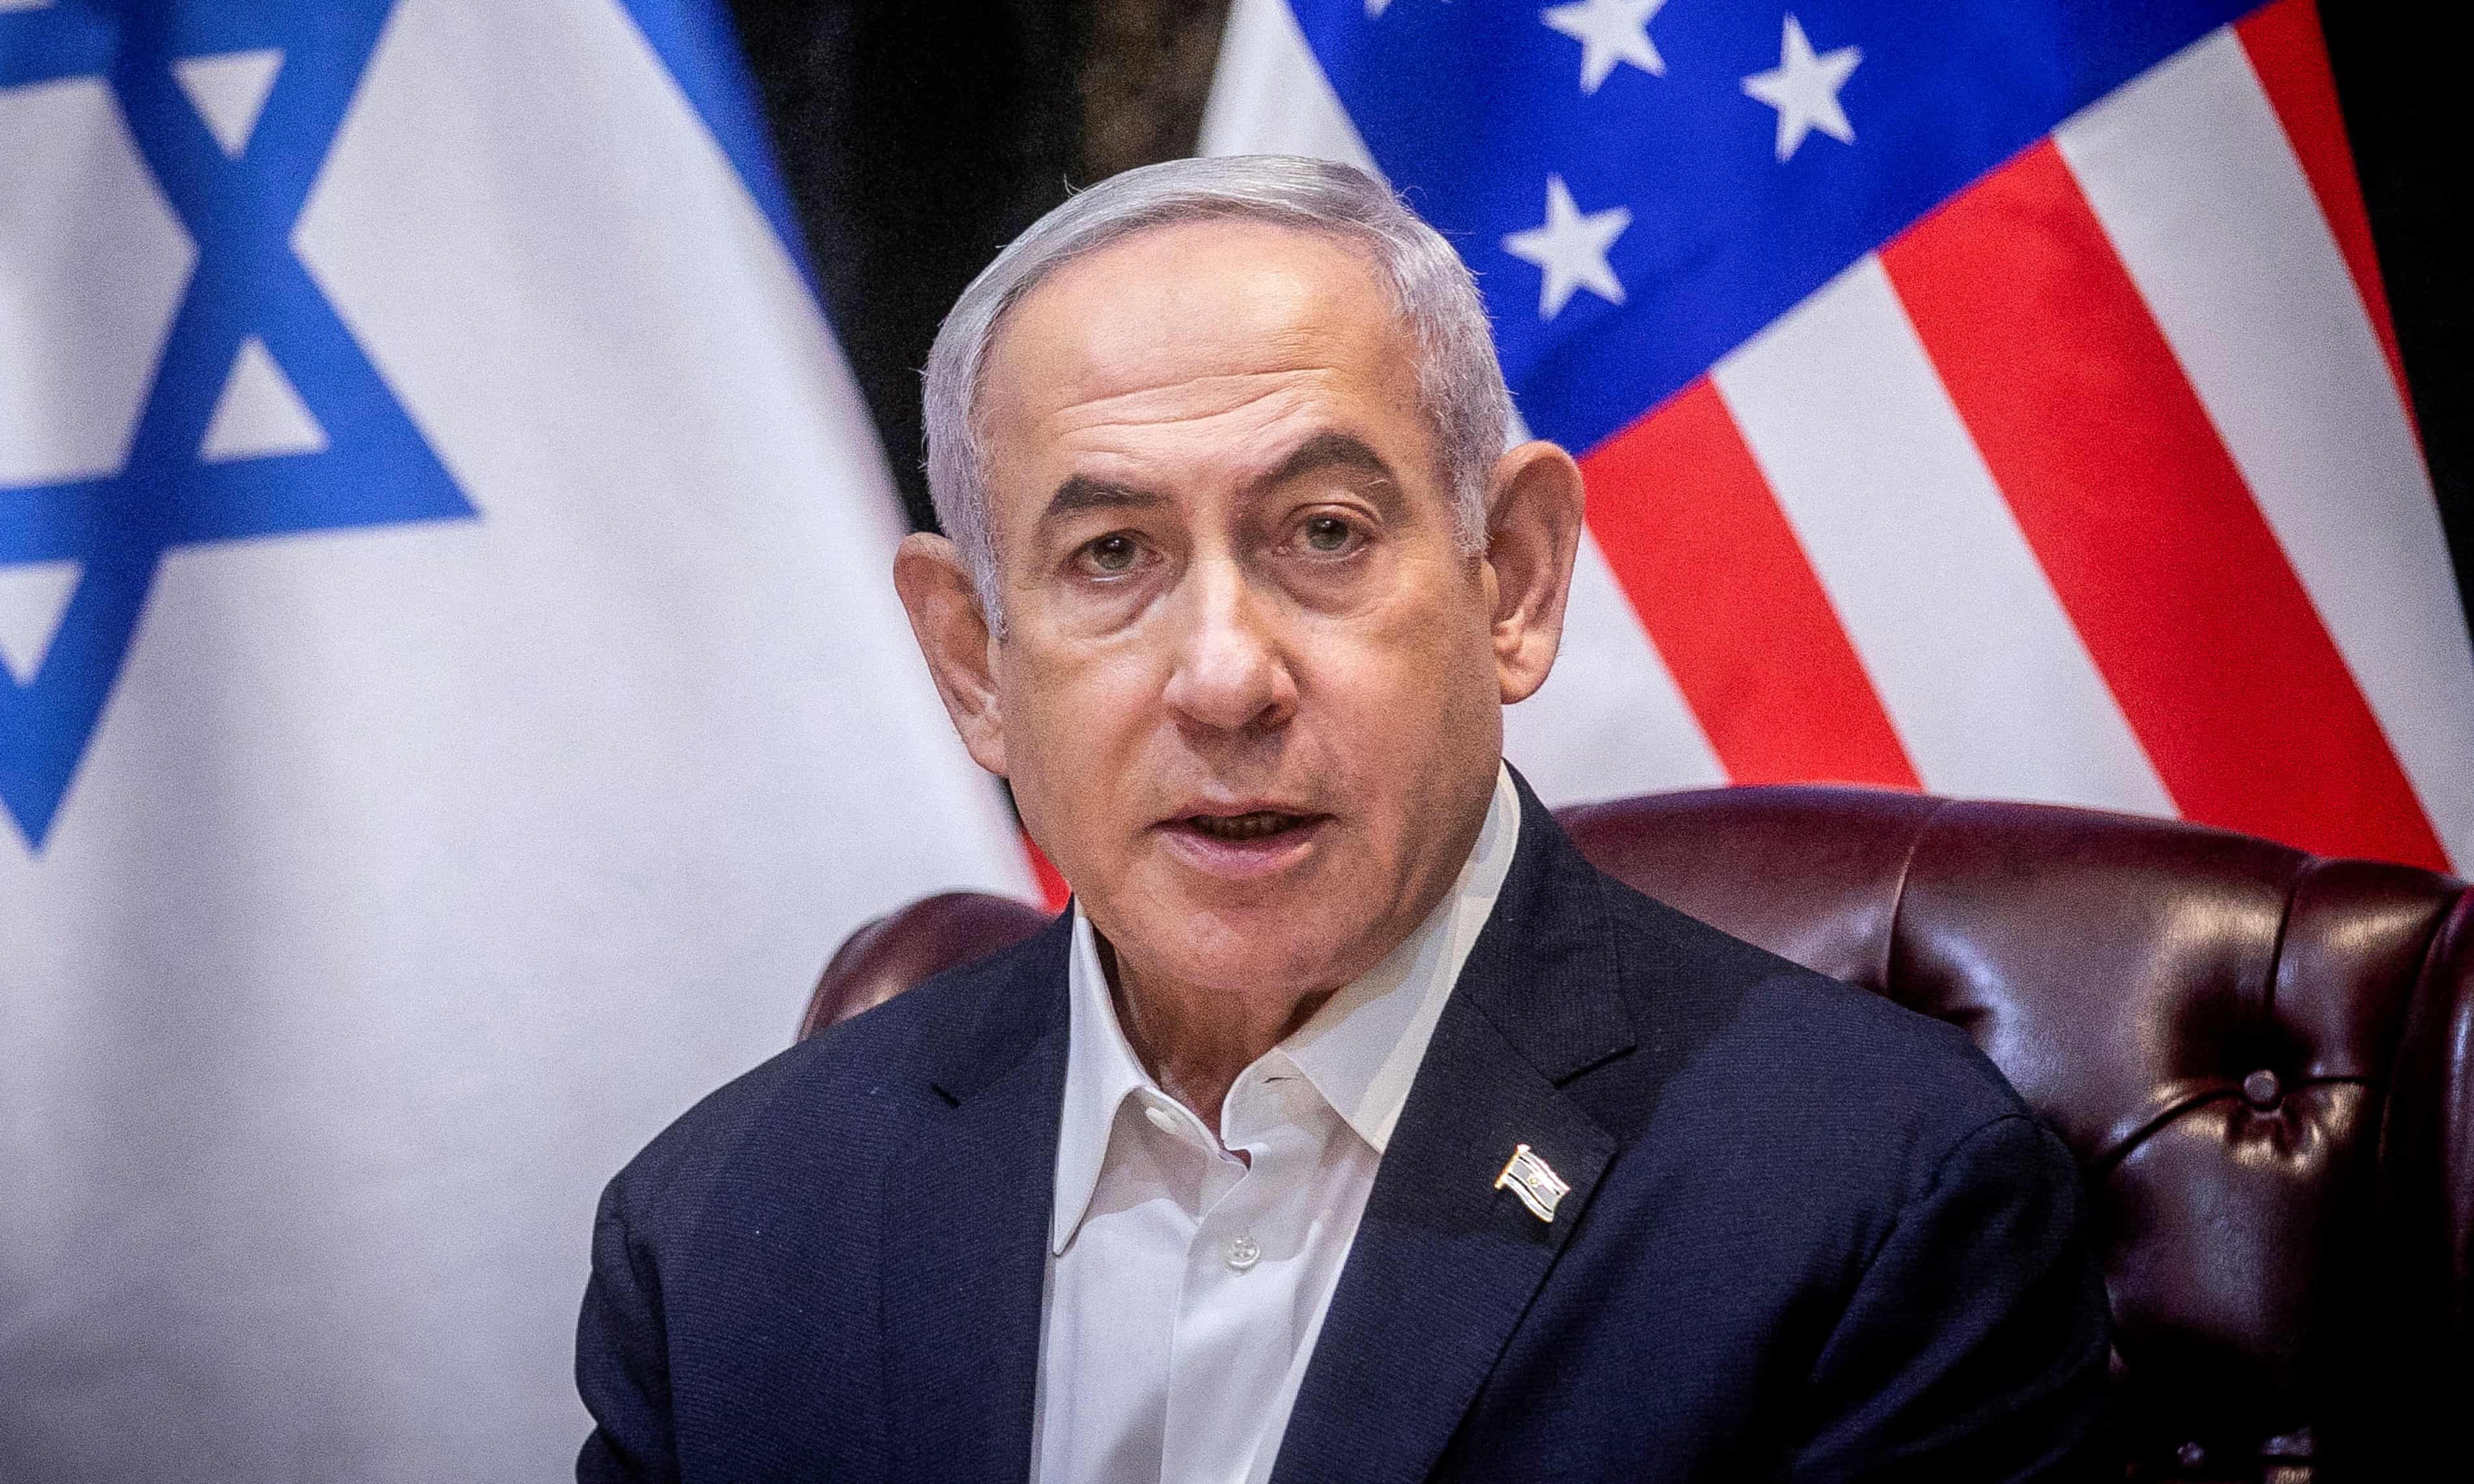 ‘Madness’: Netanyahu’s handling of US relations under scrutiny after UN vote (theguardian.com)